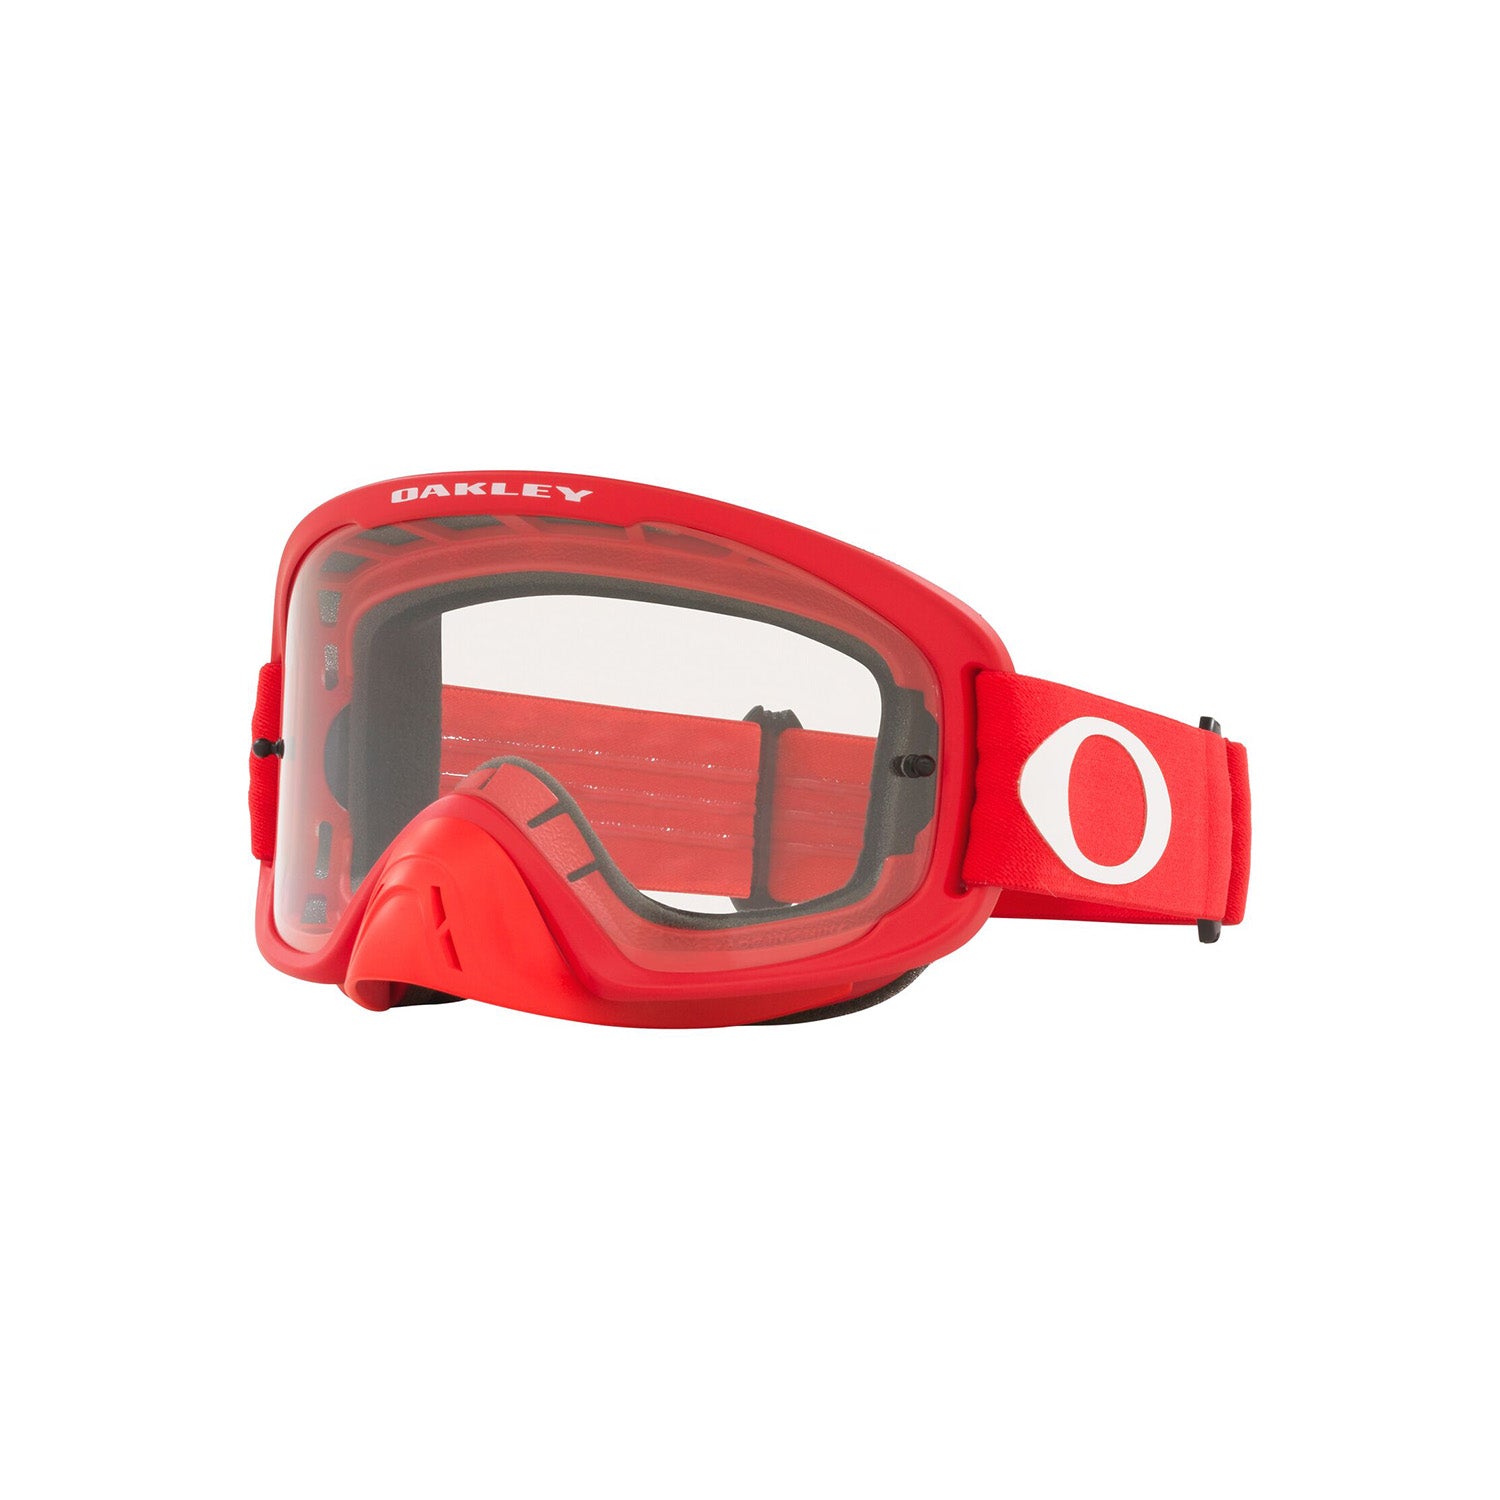 Oakley O Frame 2.0 Pro MX Goggle in Moto Red with Clear Lens